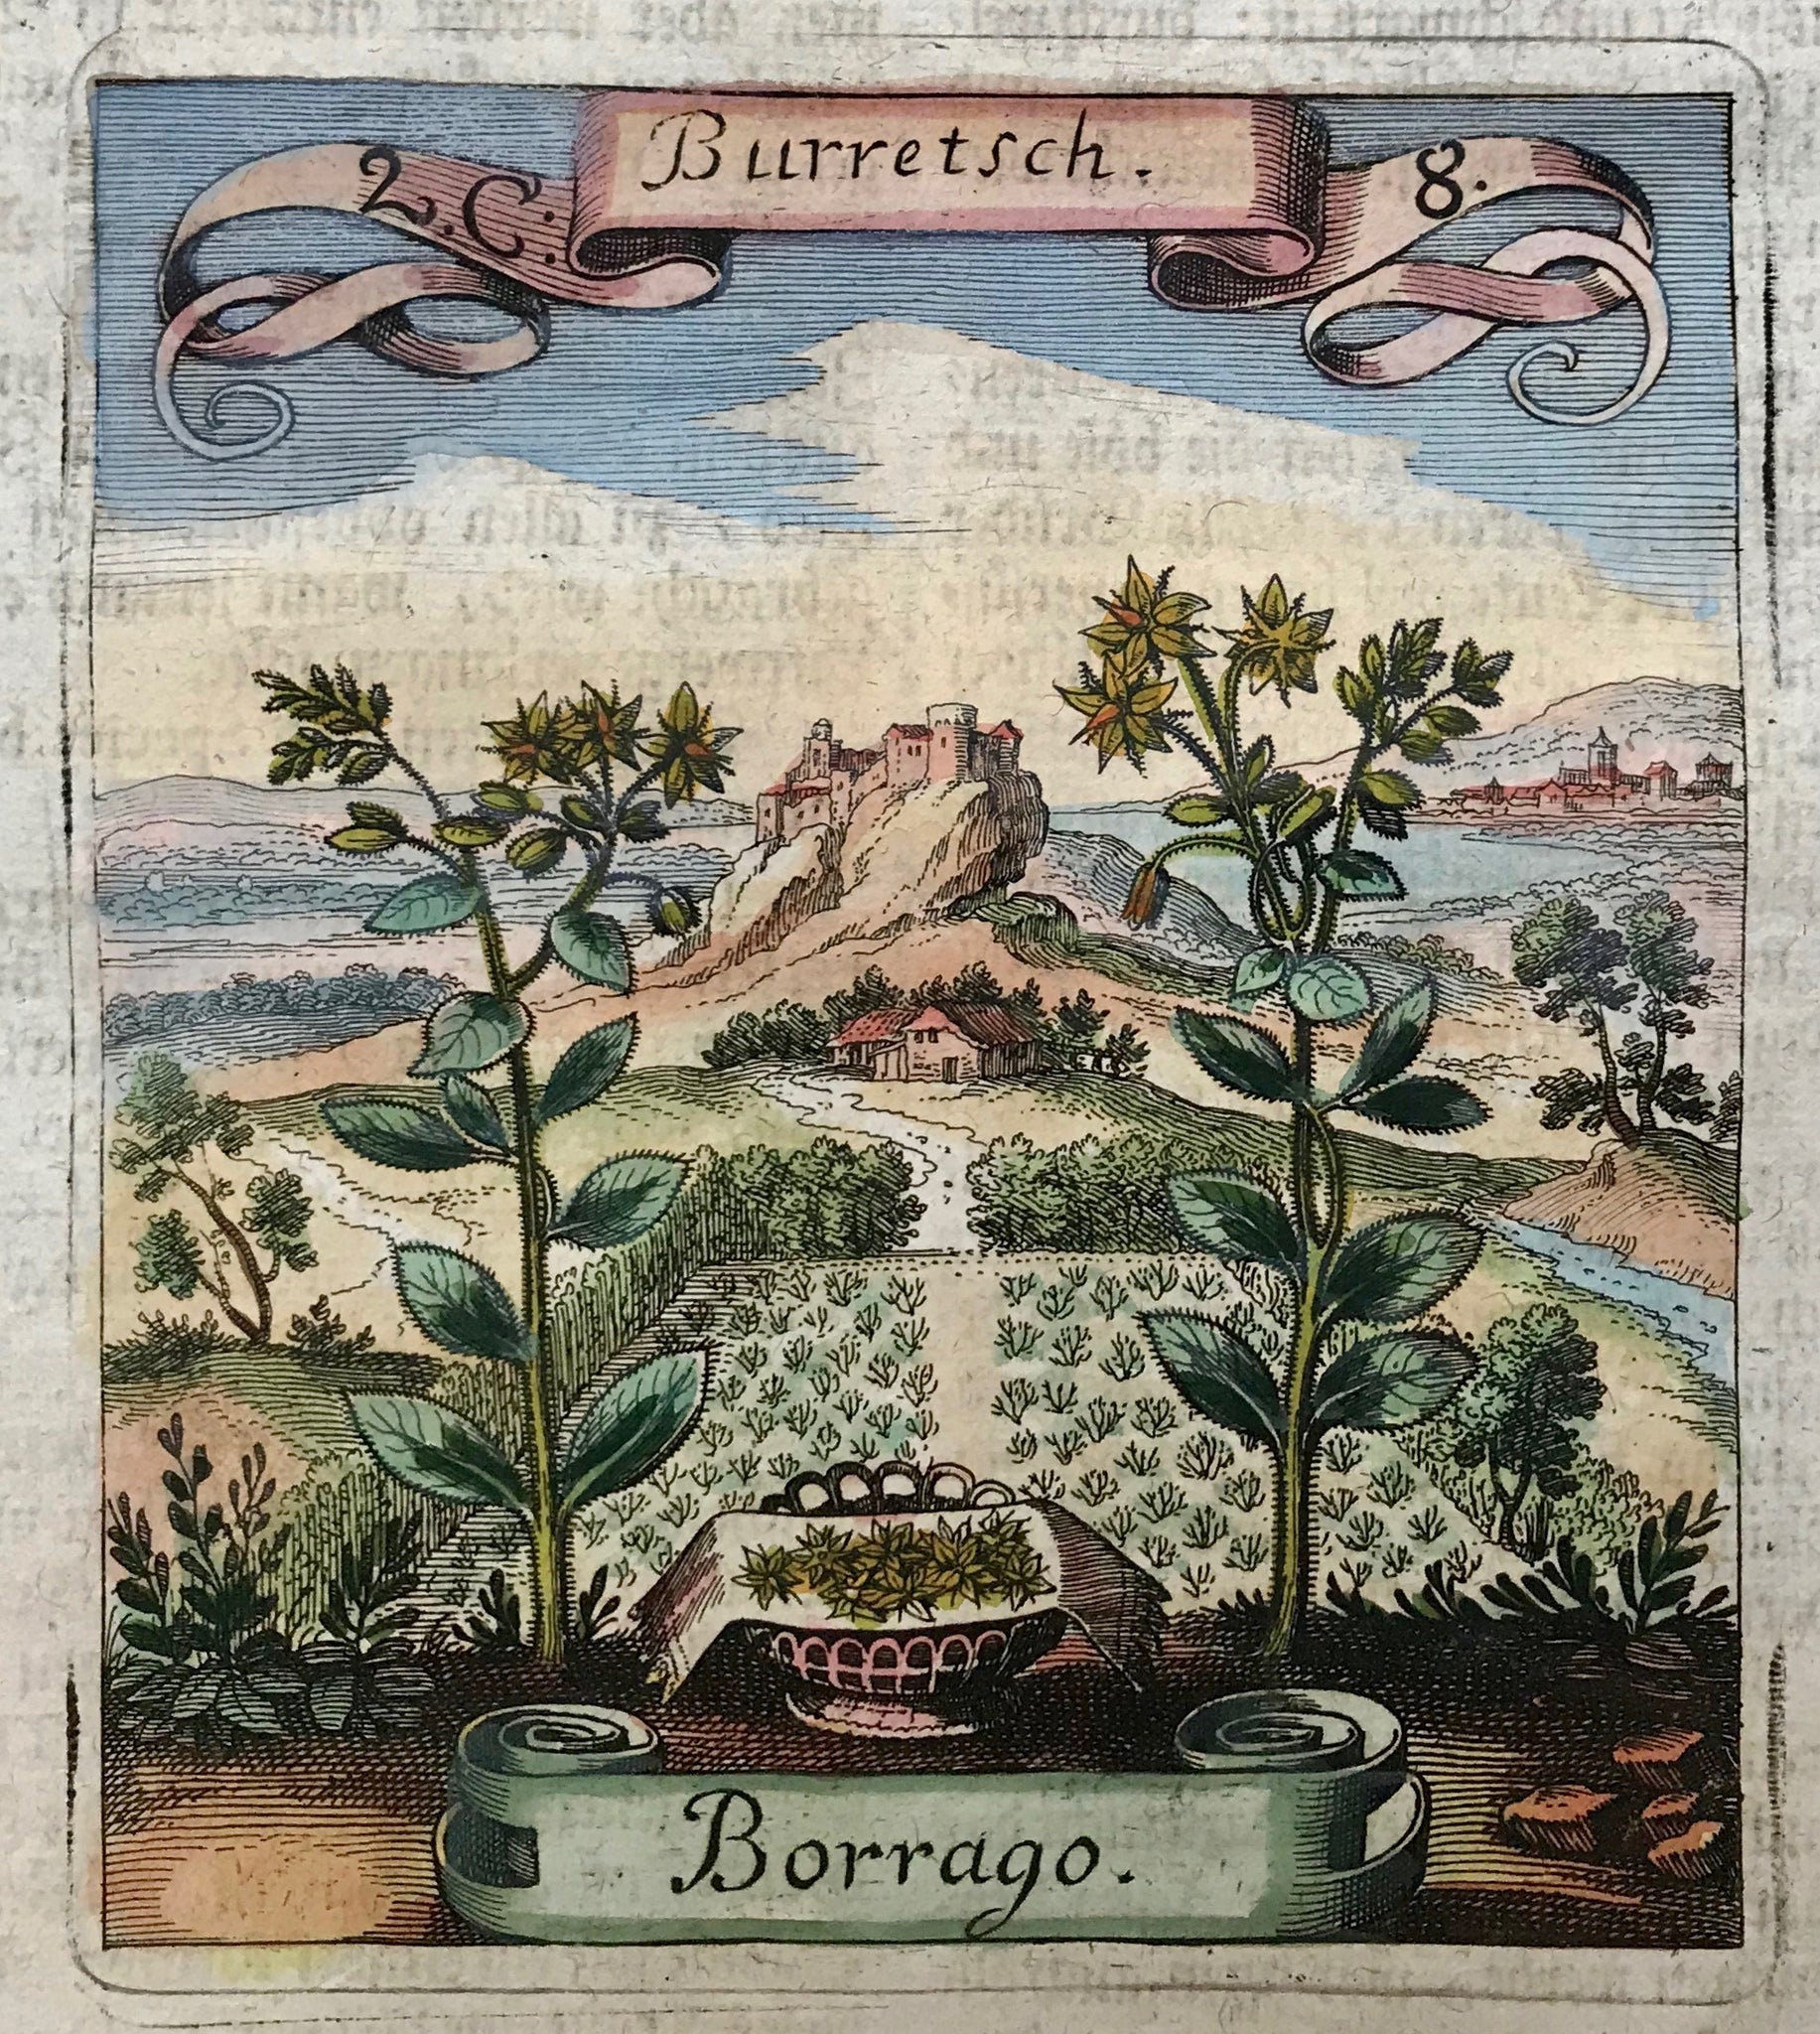 Borrago - Burretsch  Here we get to know him an author of simply wonderful descriptions of plants and flowers used in medicine. His specialty was to set the flowers oversize into a landscape, adorning the print with flying ribbon in which the name of the plant or flower is engraved. The book in which these little gems were published was called "Die fruchtbringende Gesellschaft"